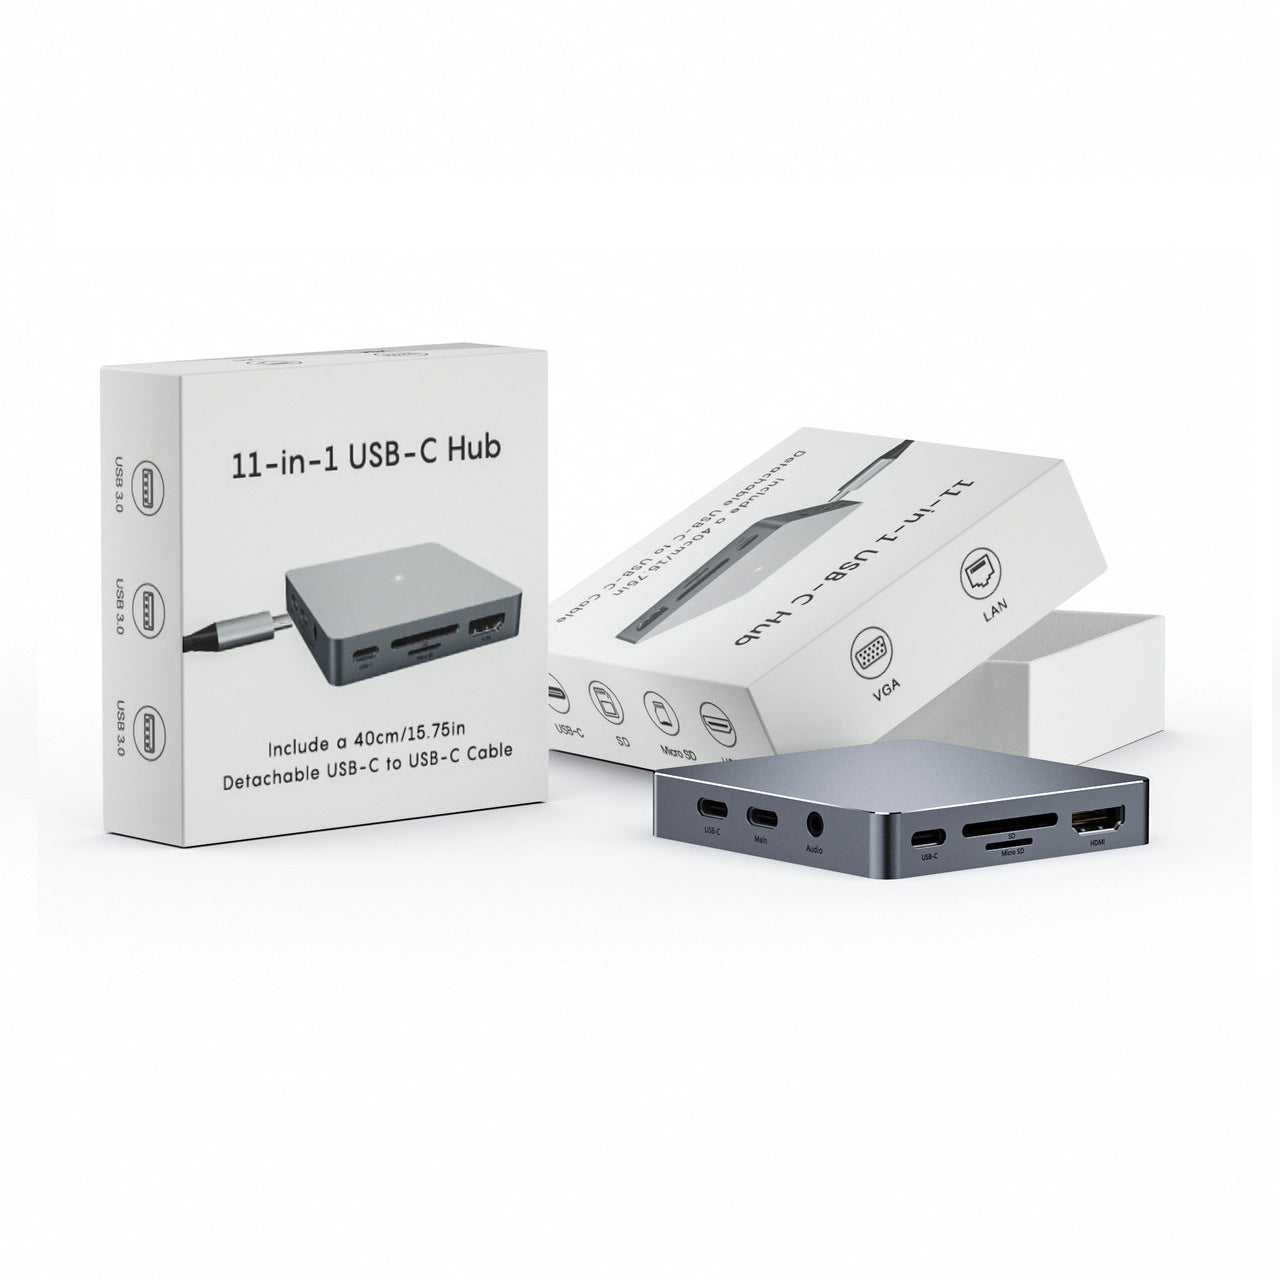 Type-C Docking Station with Multiple Ports: HDMI, VGA, RJ45, USB 3.0, and More